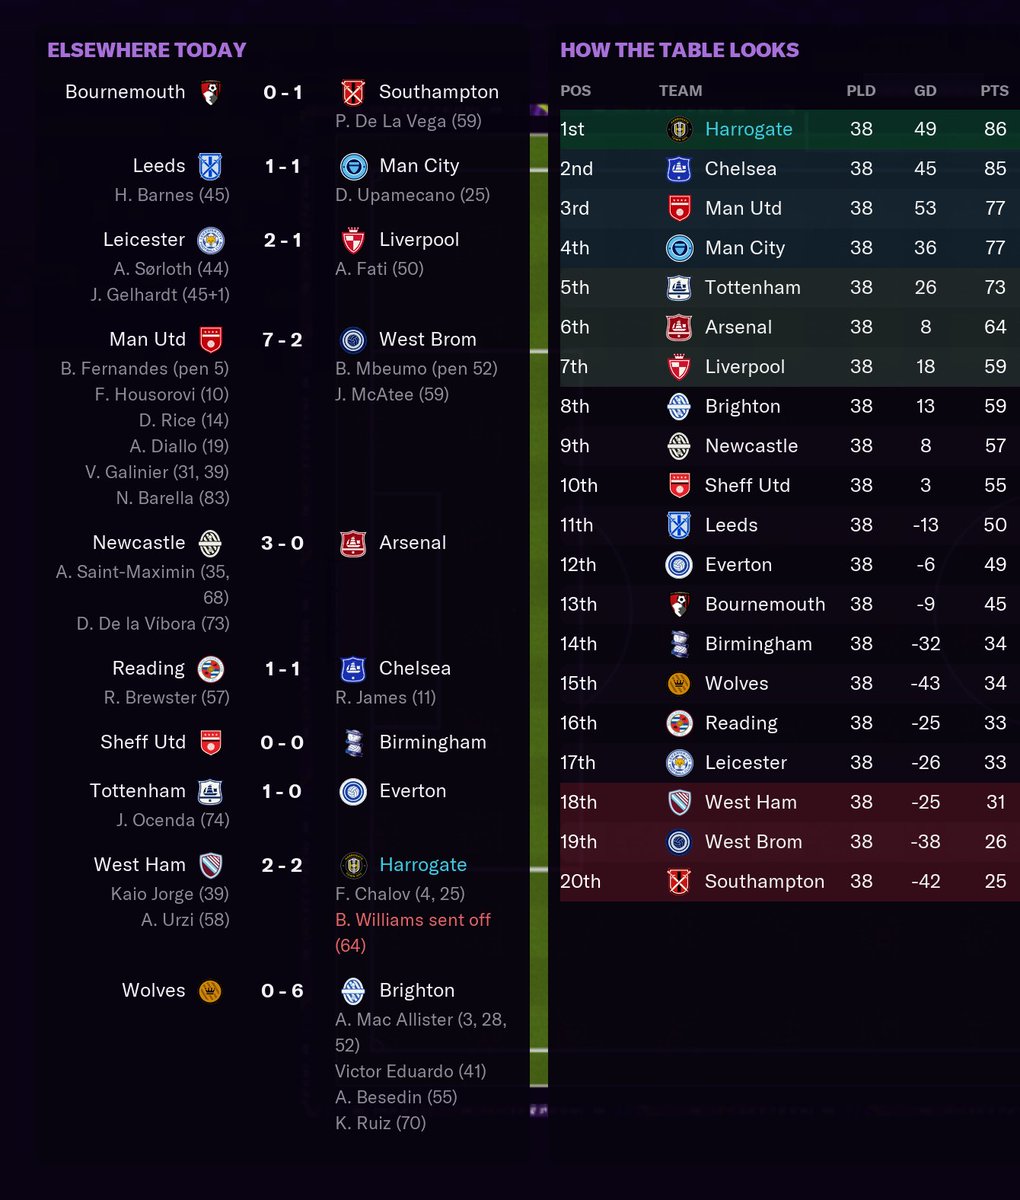 It is done. I can't actually believe it. Thankyou Rhian Brewster you beautiful fucking human being. HARROGATE ARE PREMIER LEAGUE CHAMPIONS SOMEHOW